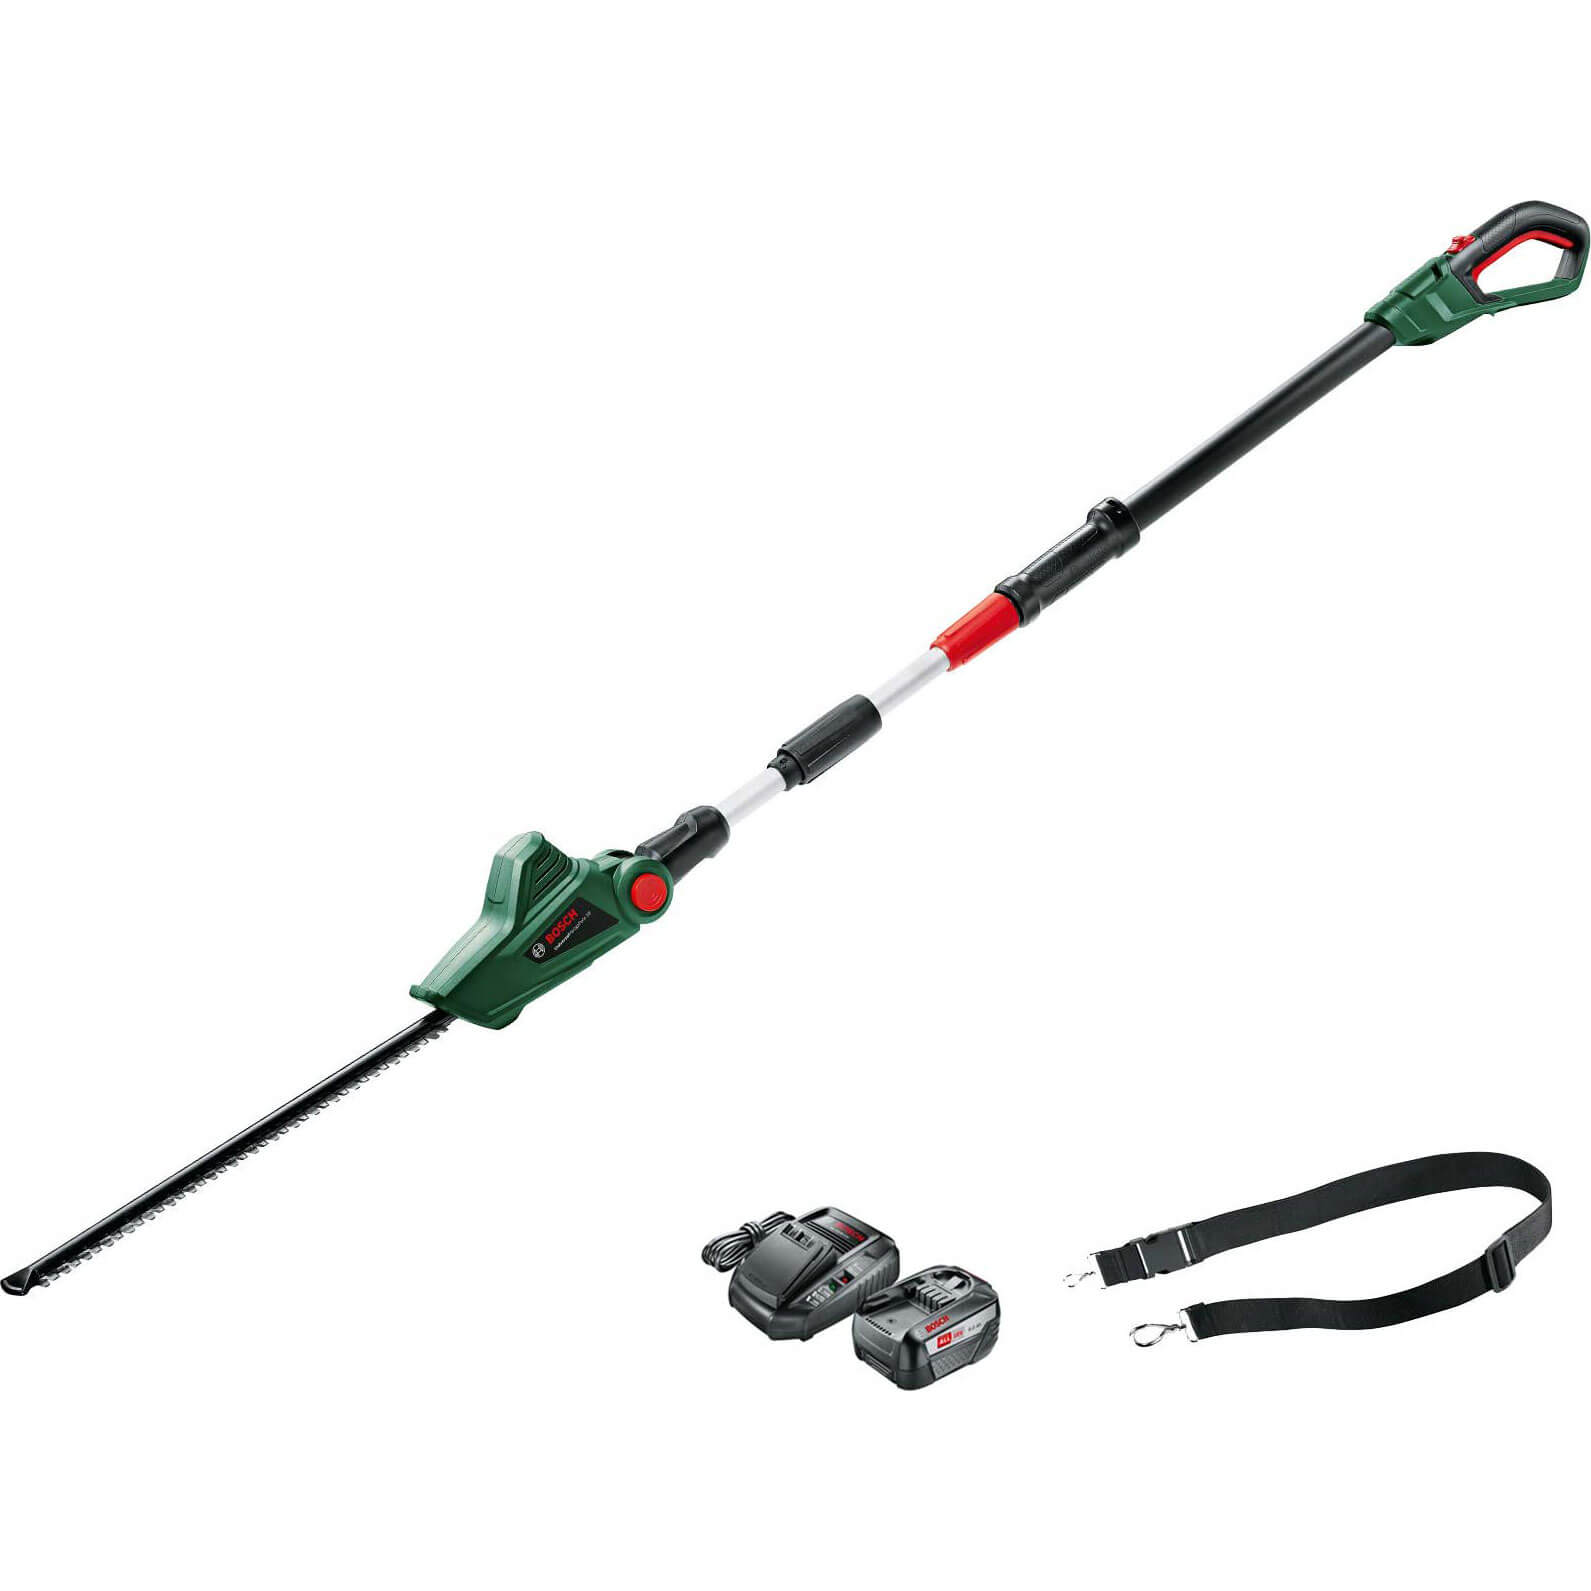 Bosch UNIVERSALHEDGEPOLE P4A 18v Cordless Telescopic Pole Hedge Trimmer 430mm 1 x 6ah Li-ion Charger FREE Hedge Trimmer Lubricant Worth 4.95